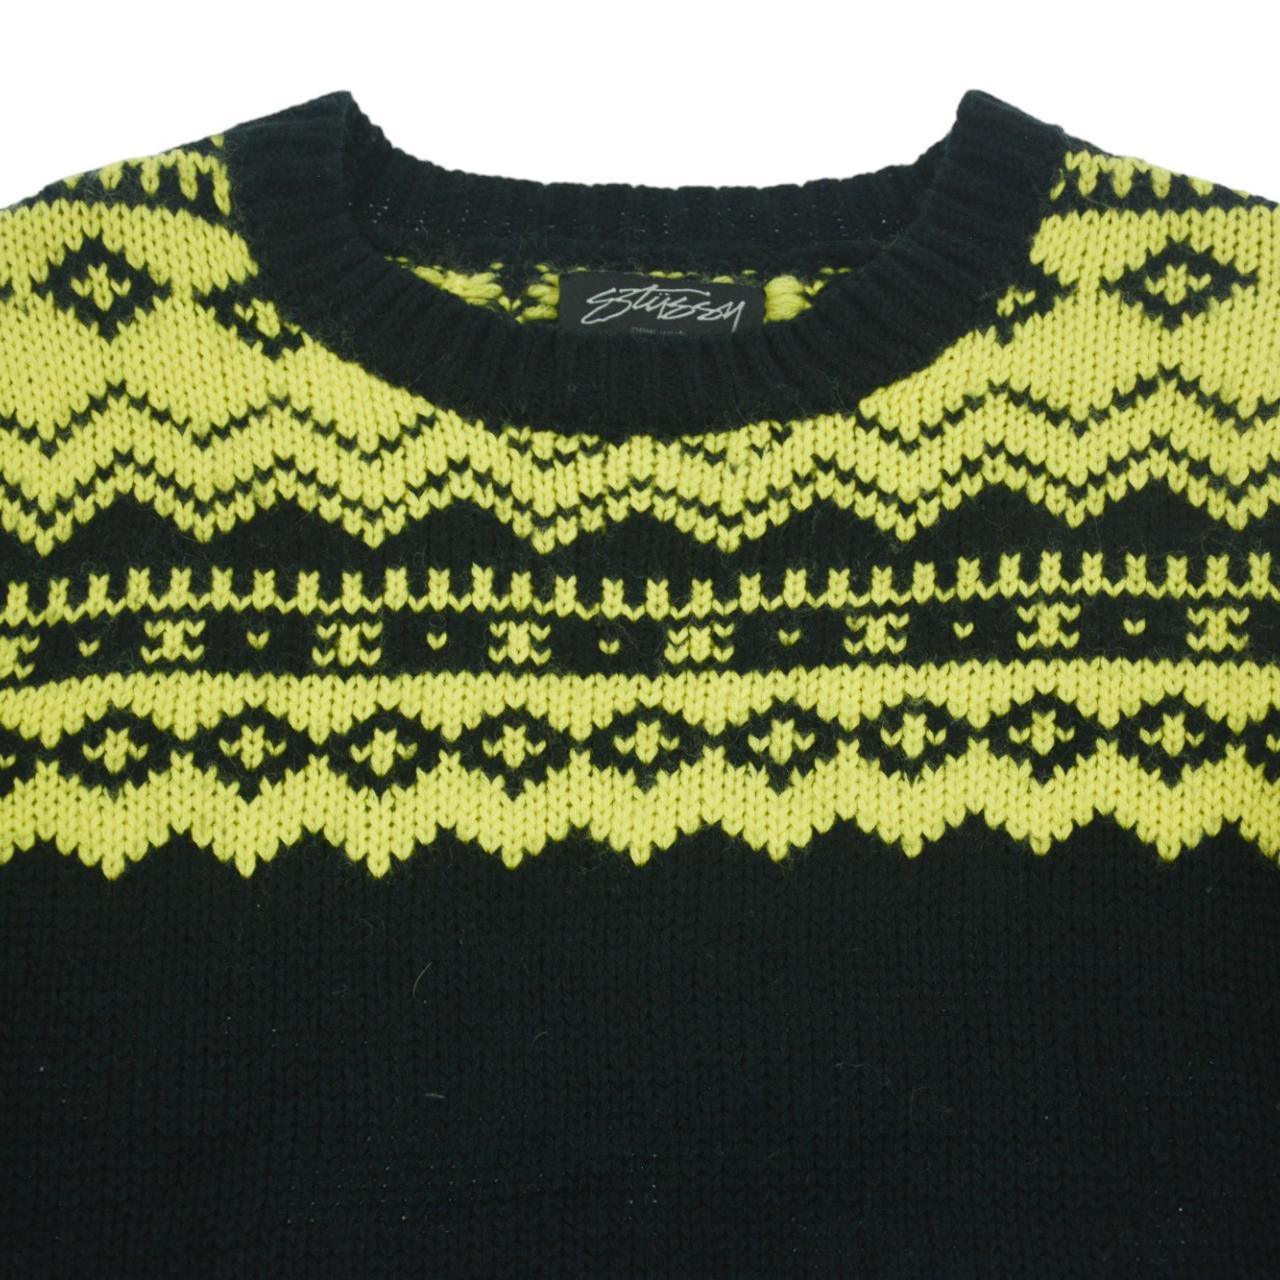 Vintage Stussy Knitted Jumper Woman’s Size M - Known Source